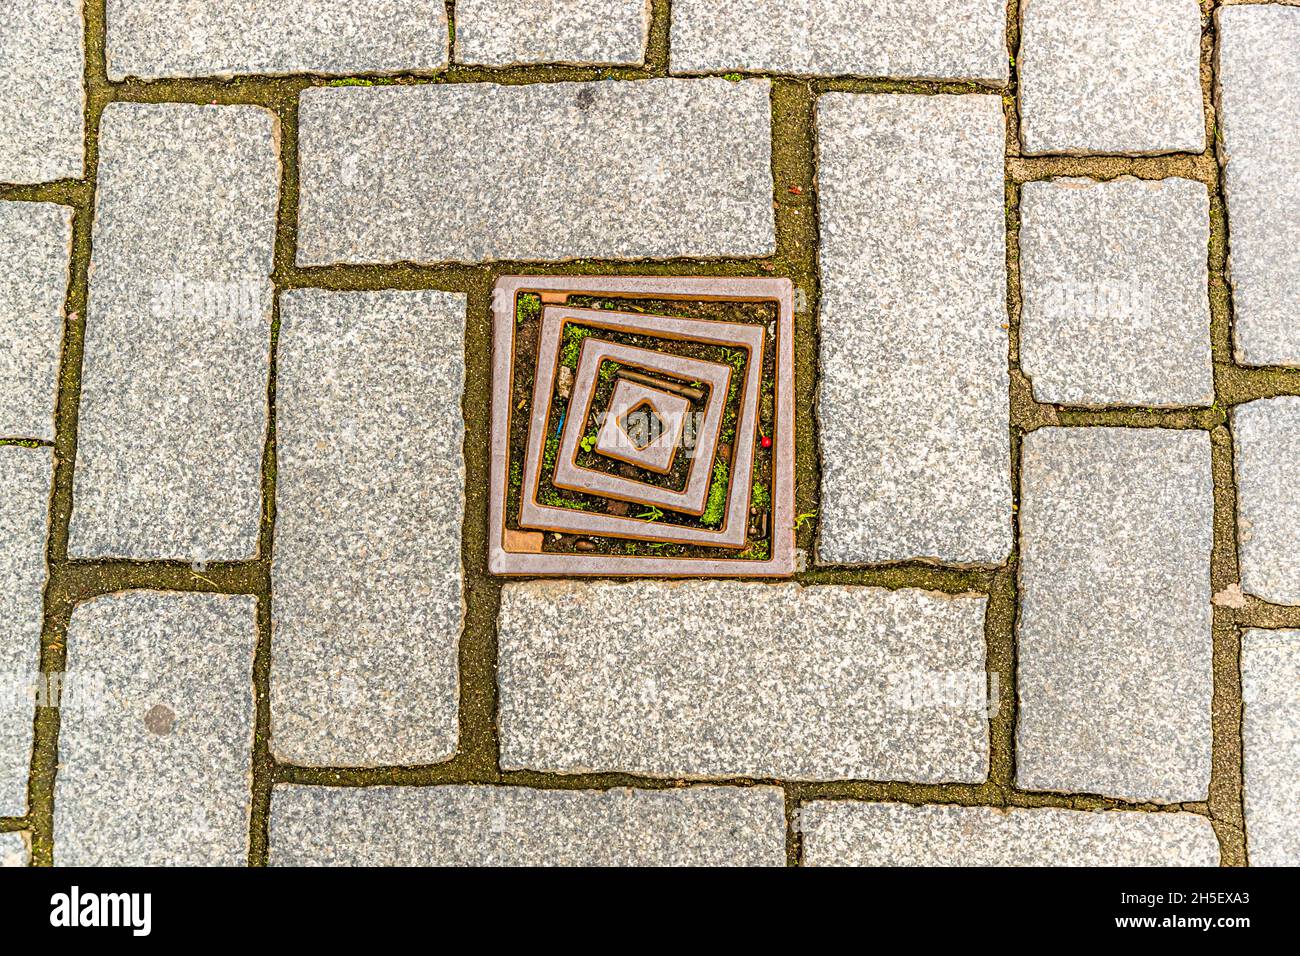 Hydrant cover in Zutphen, Netherlands Stock Photo